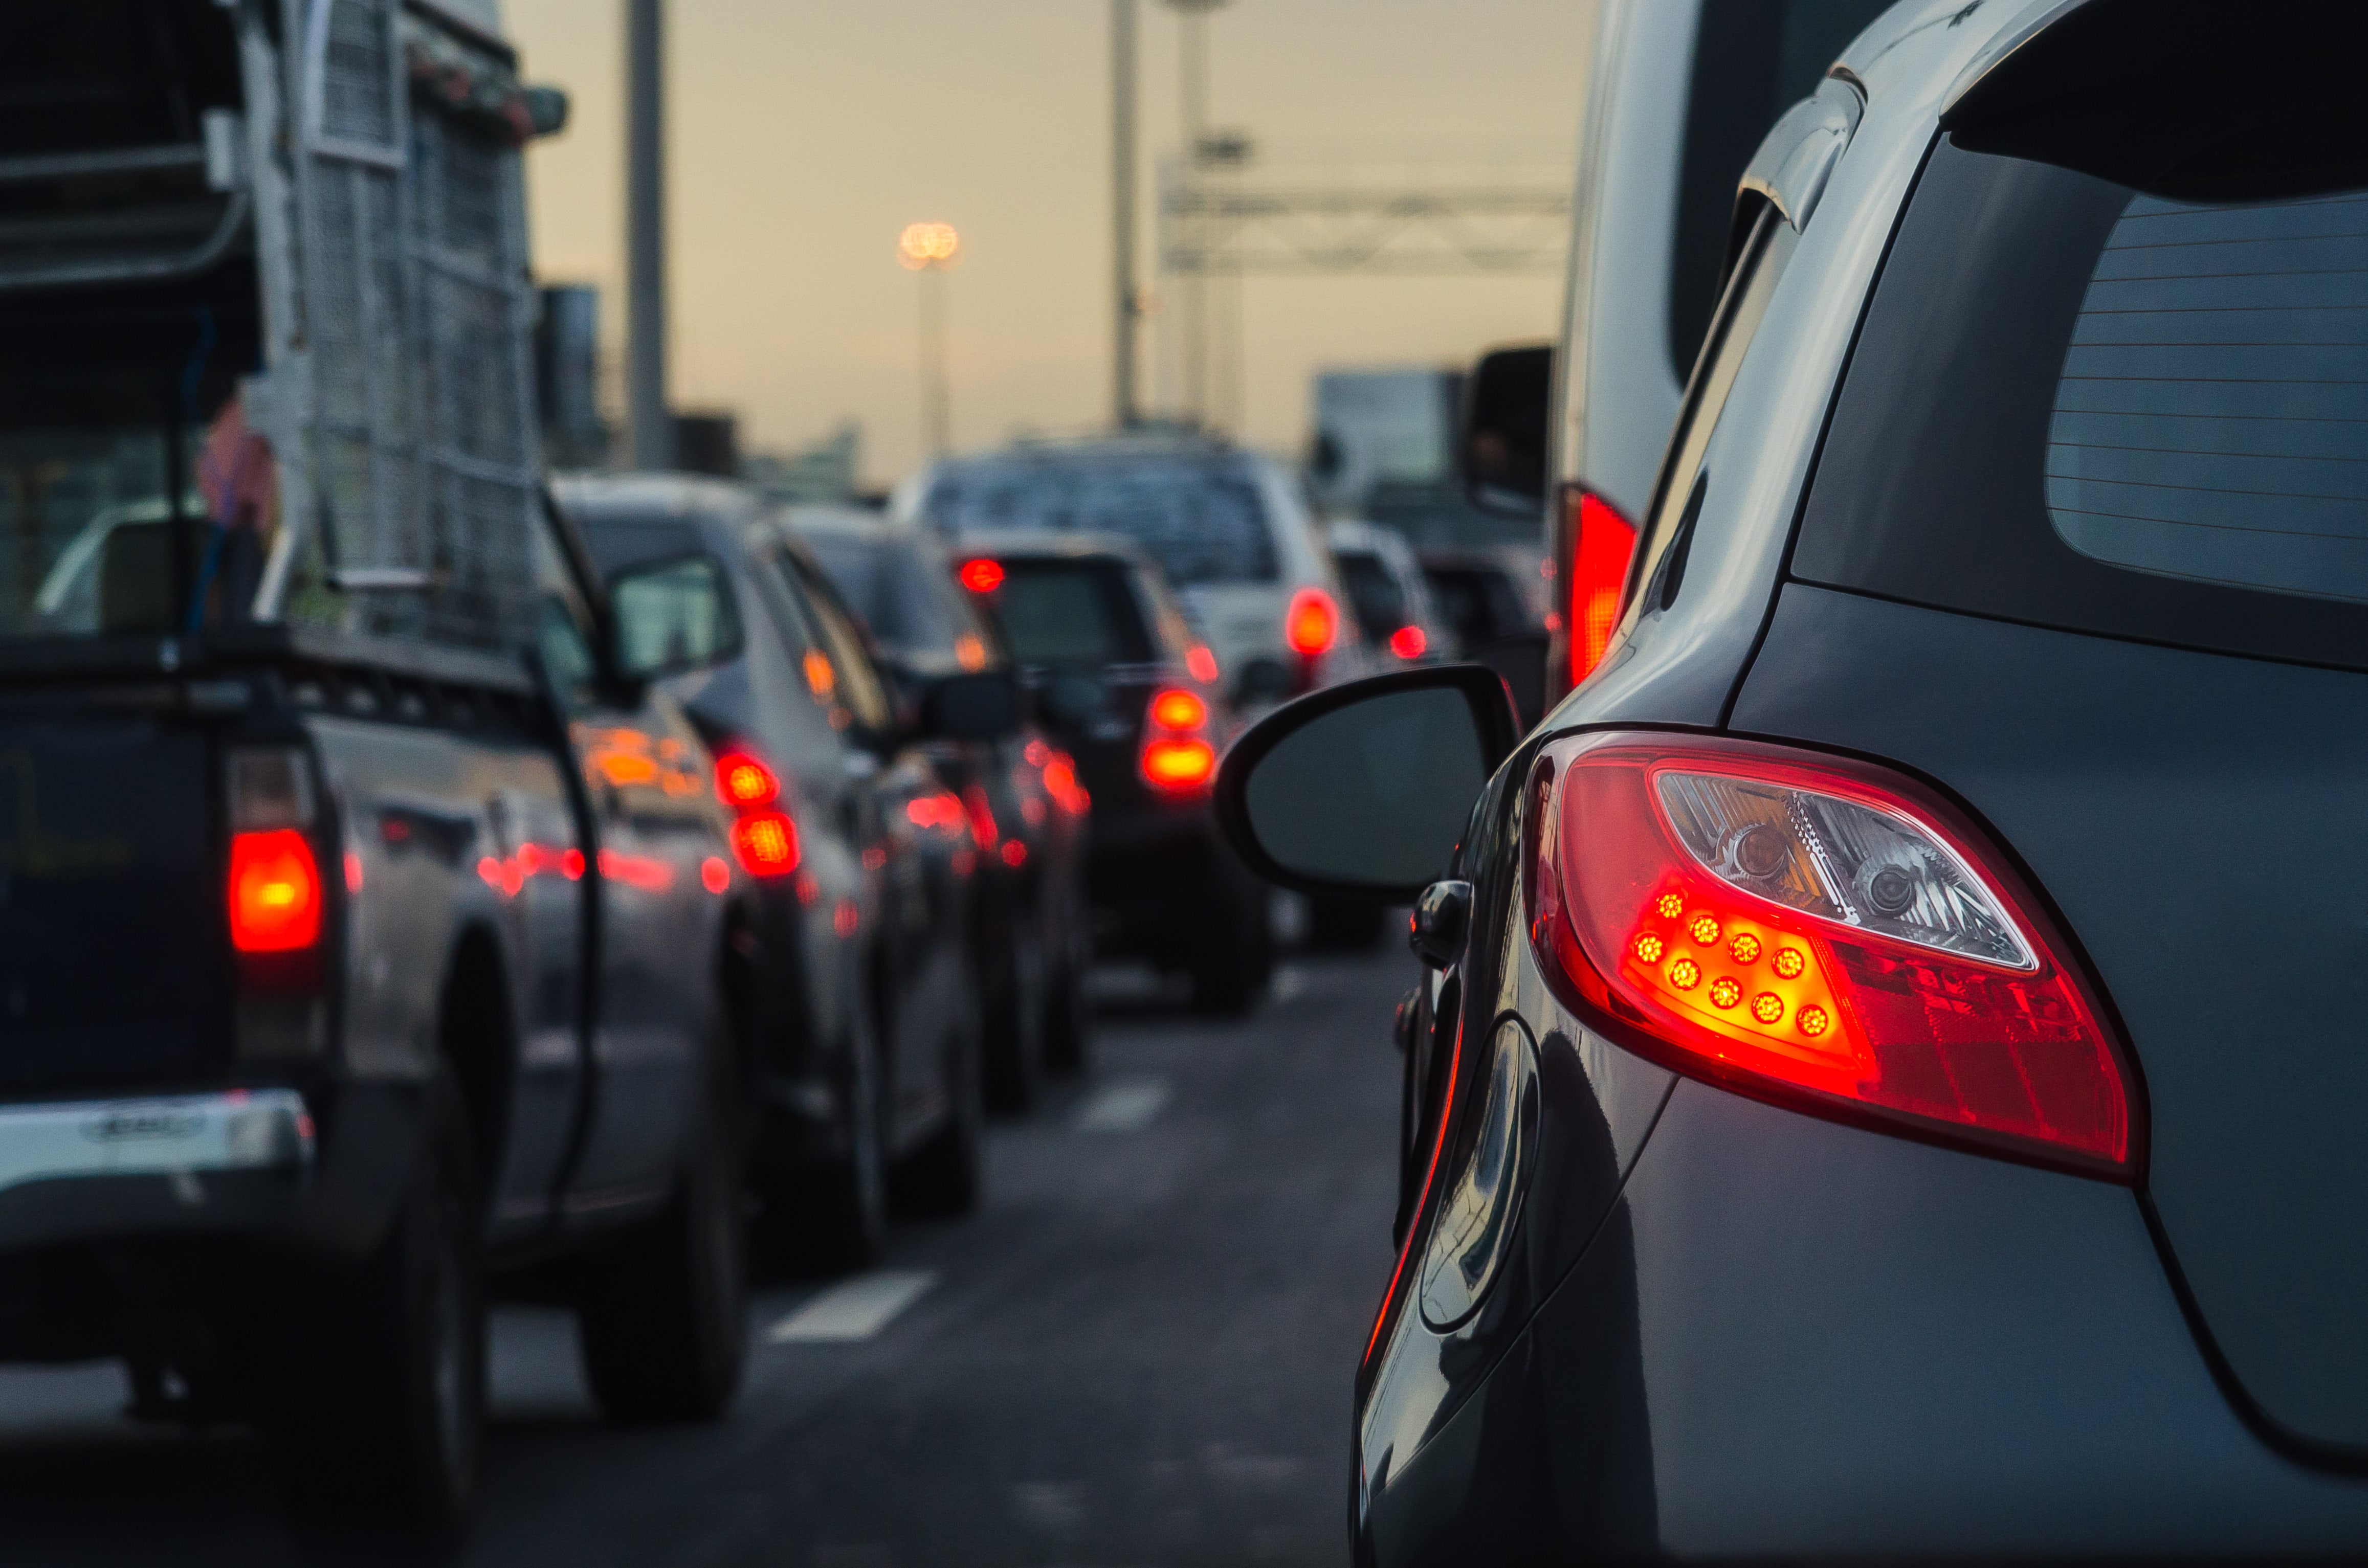 How much time do we waste in traffic and how to avoid traffic jams?